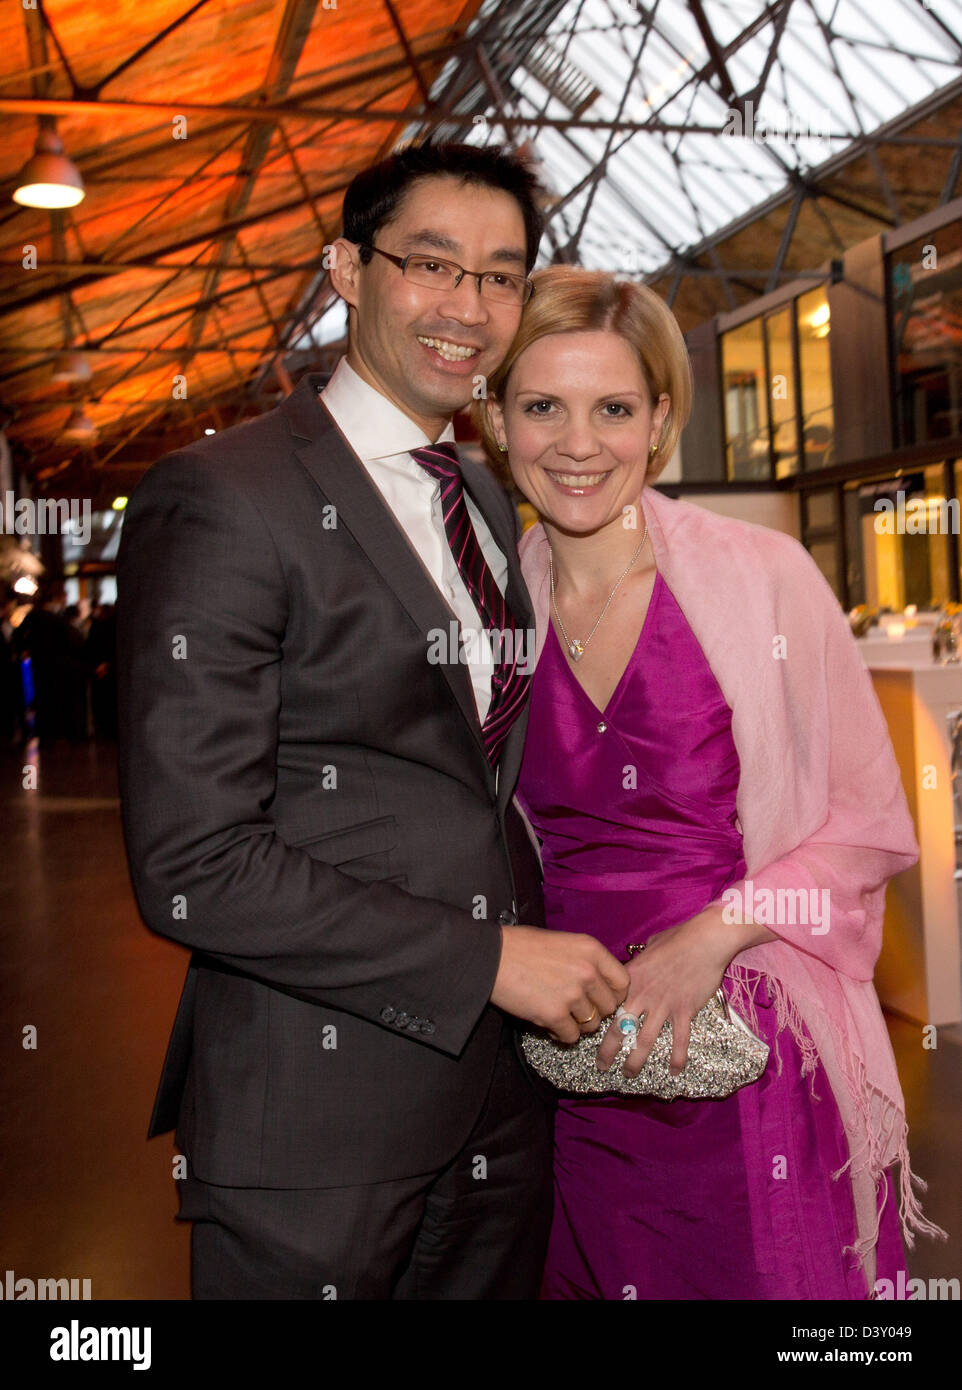 German Federal Economics Minister Philipp Roesler and his wife Wiebke arrive for Roesler's birthday party at the Classic Remise in Berlin, Germany, 26 February 2013. Roesler celebrated his 40th birthday on 24 February 2013. Photo: JOERG CARSTENSEN Stock Photo